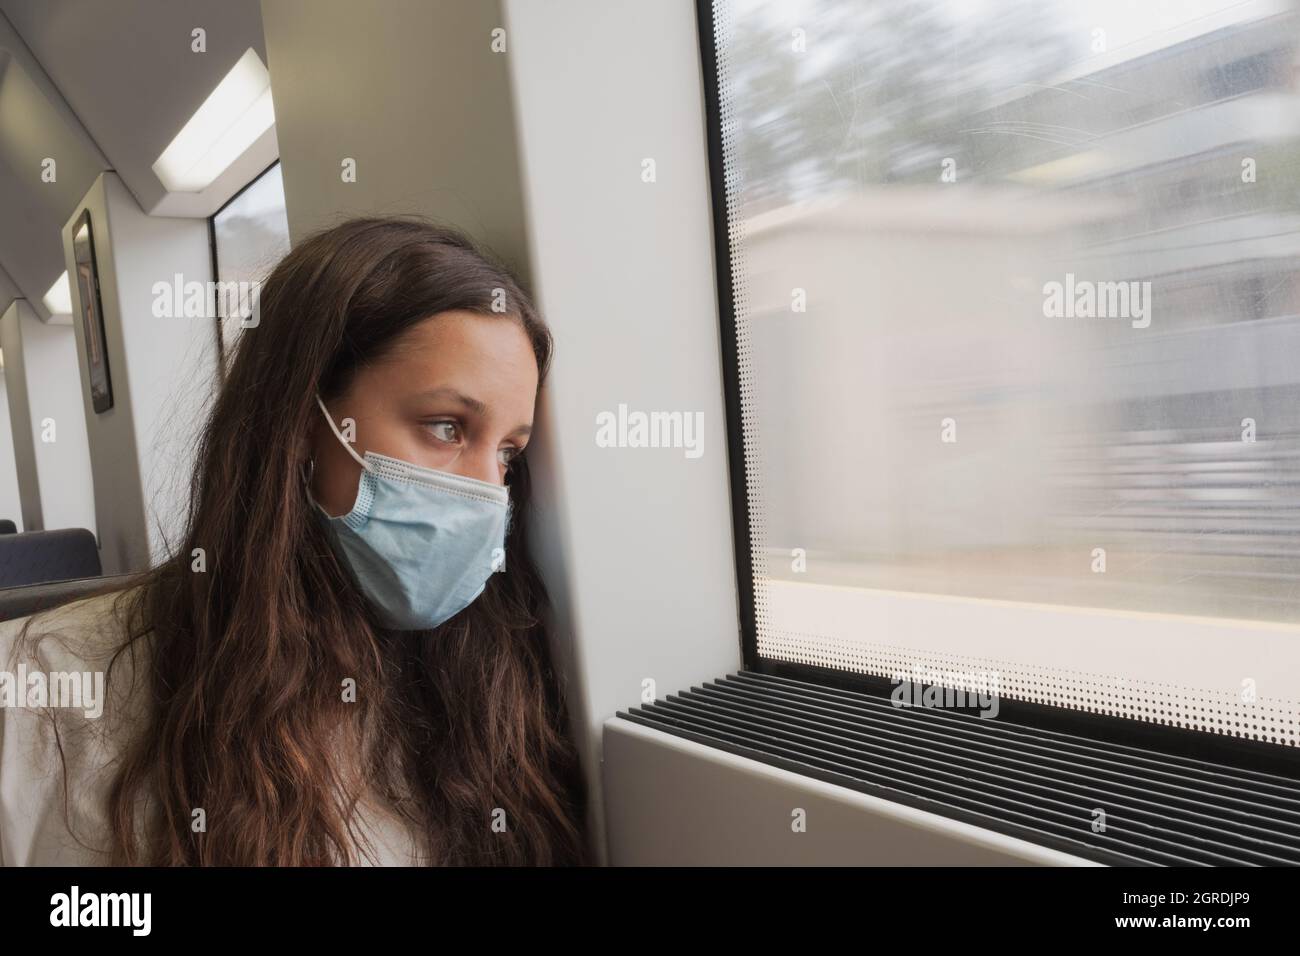 Pretty girl with long hair sitting in a local train looking outside the window. A young train passenger with protective mask. She seems to be travelin Stock Photo